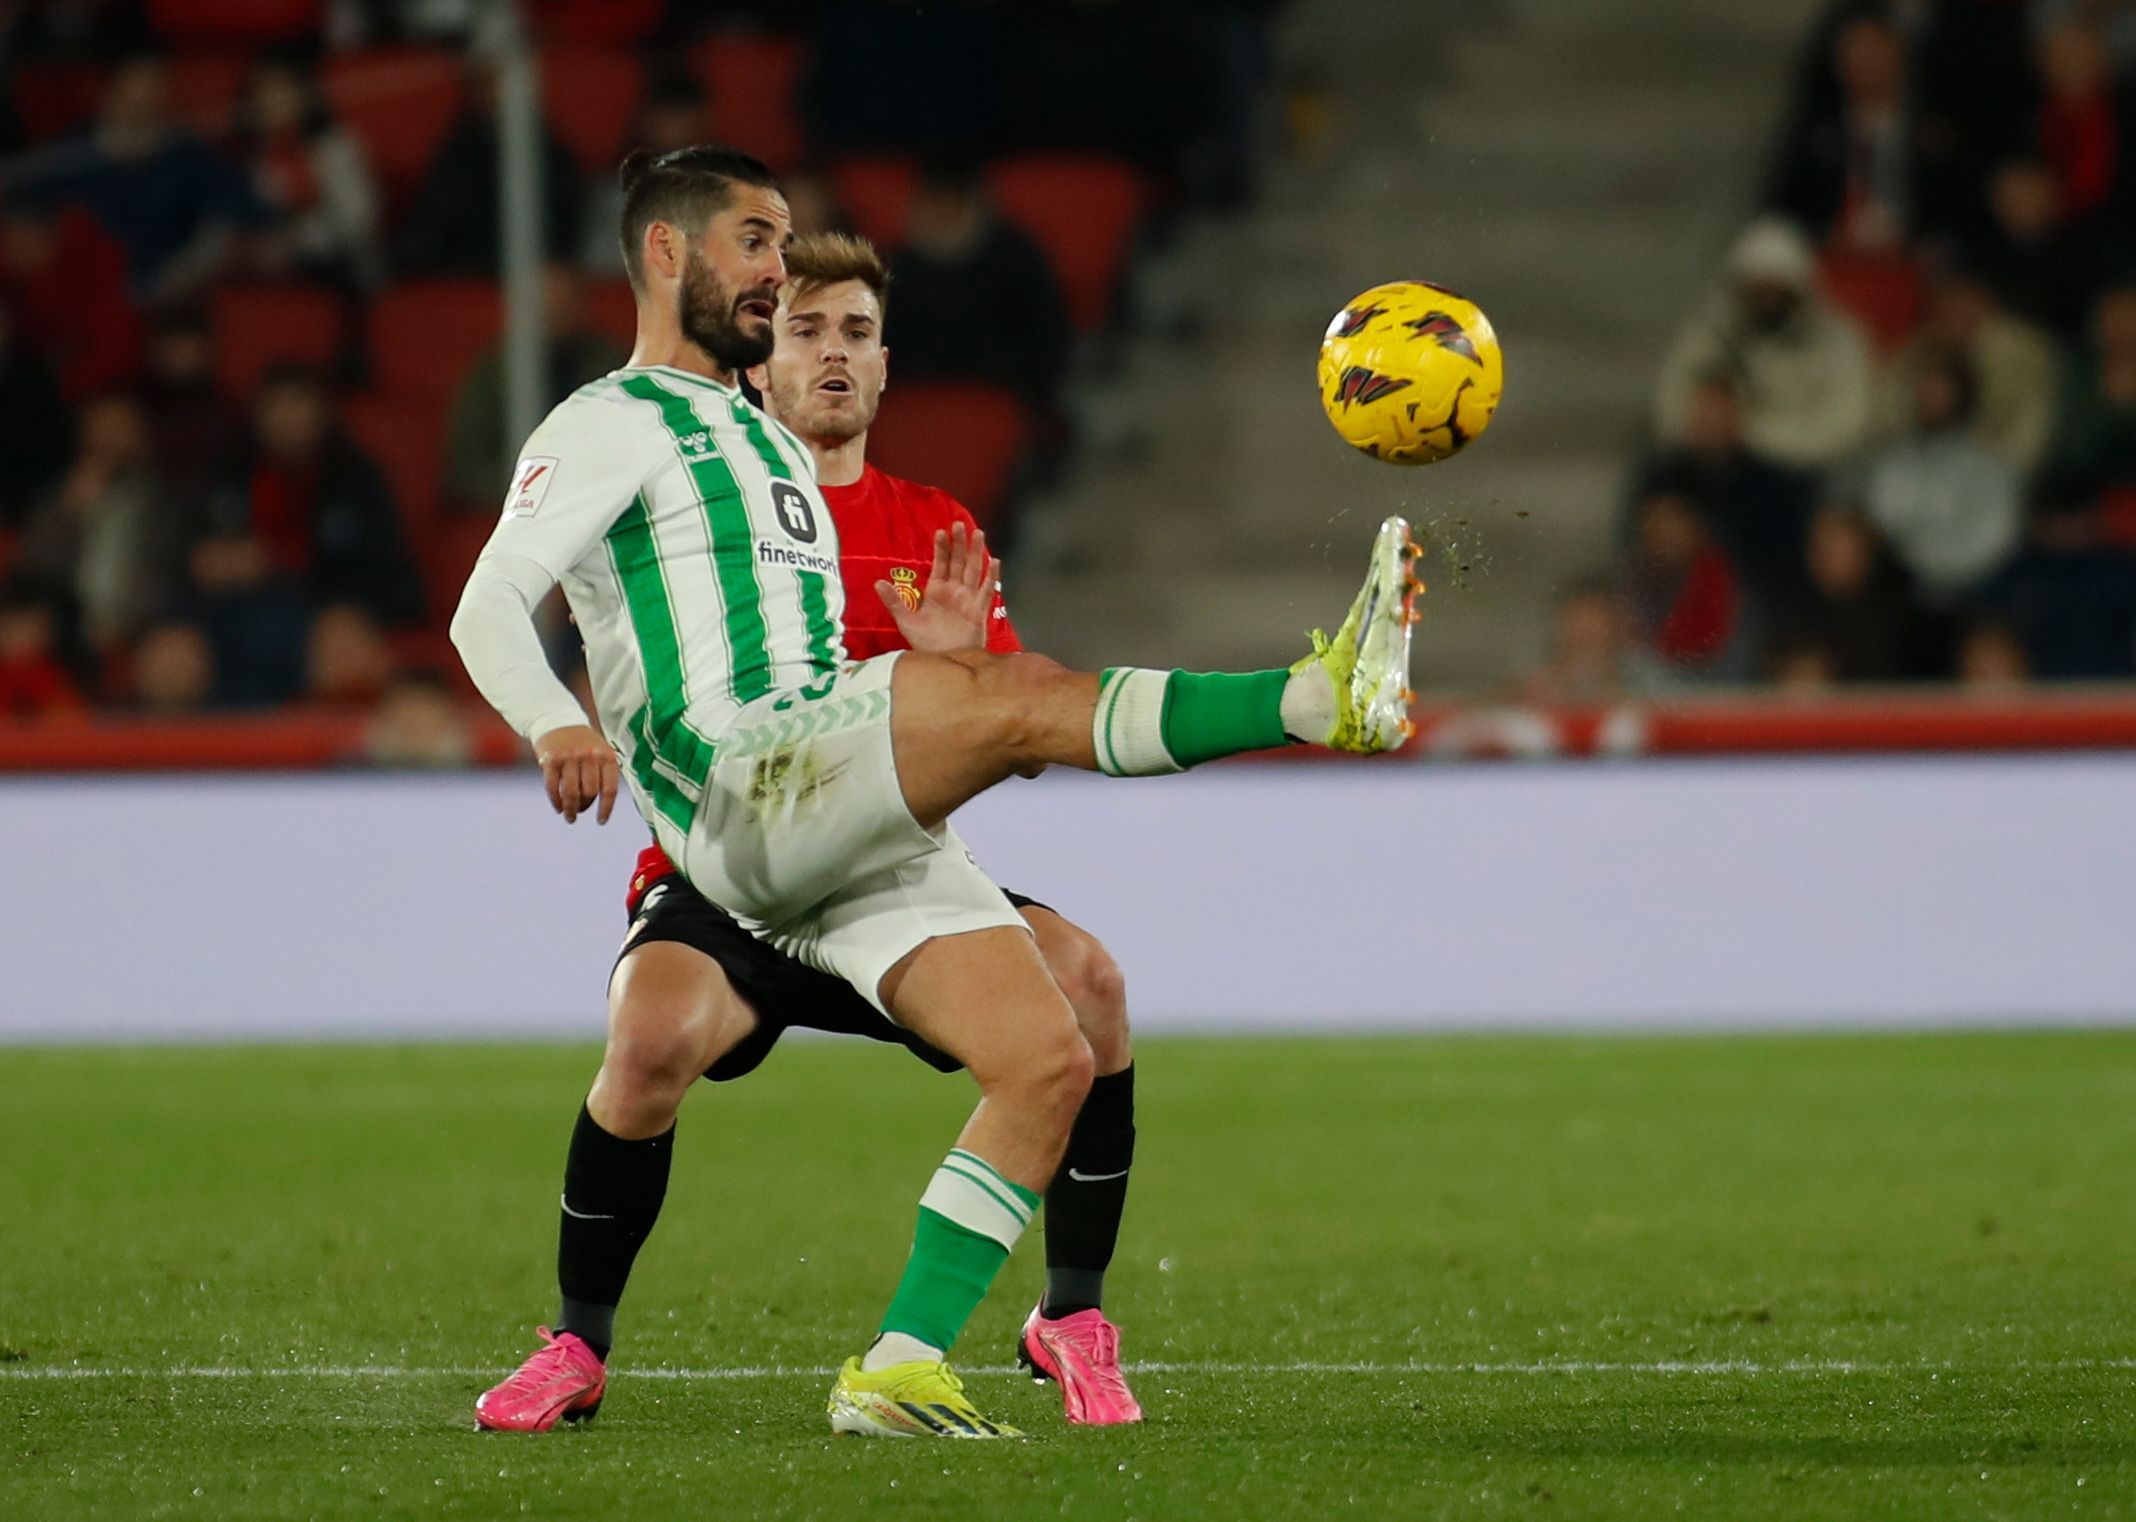 Season in review: Isco or bust for Real Betis in tired season